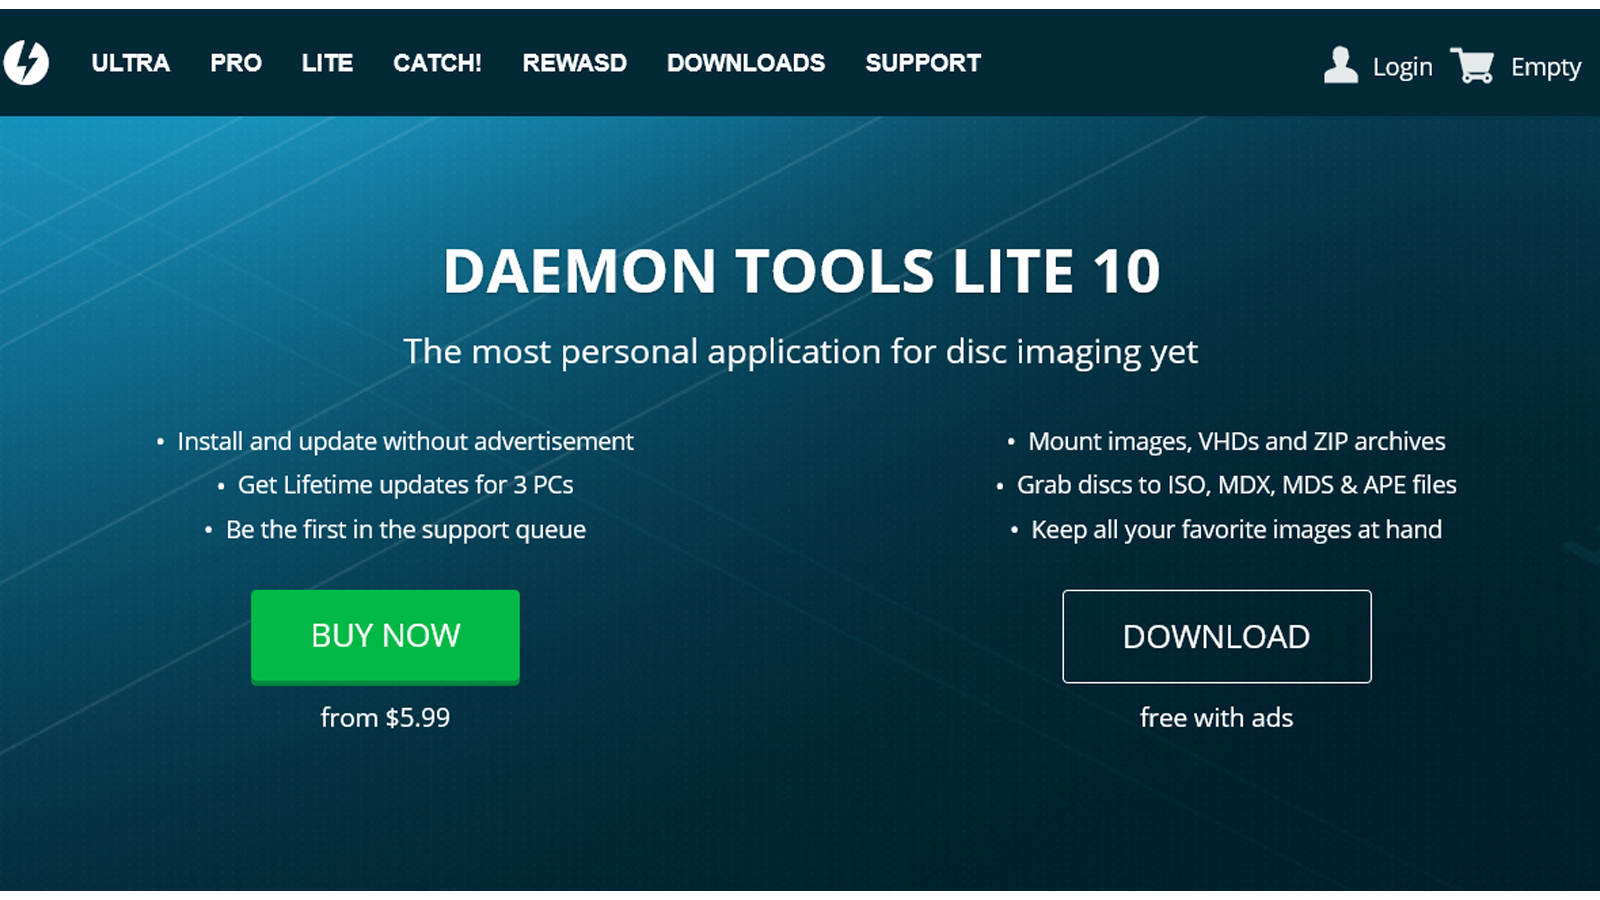 Find detailed information about Daemon Tools Lite